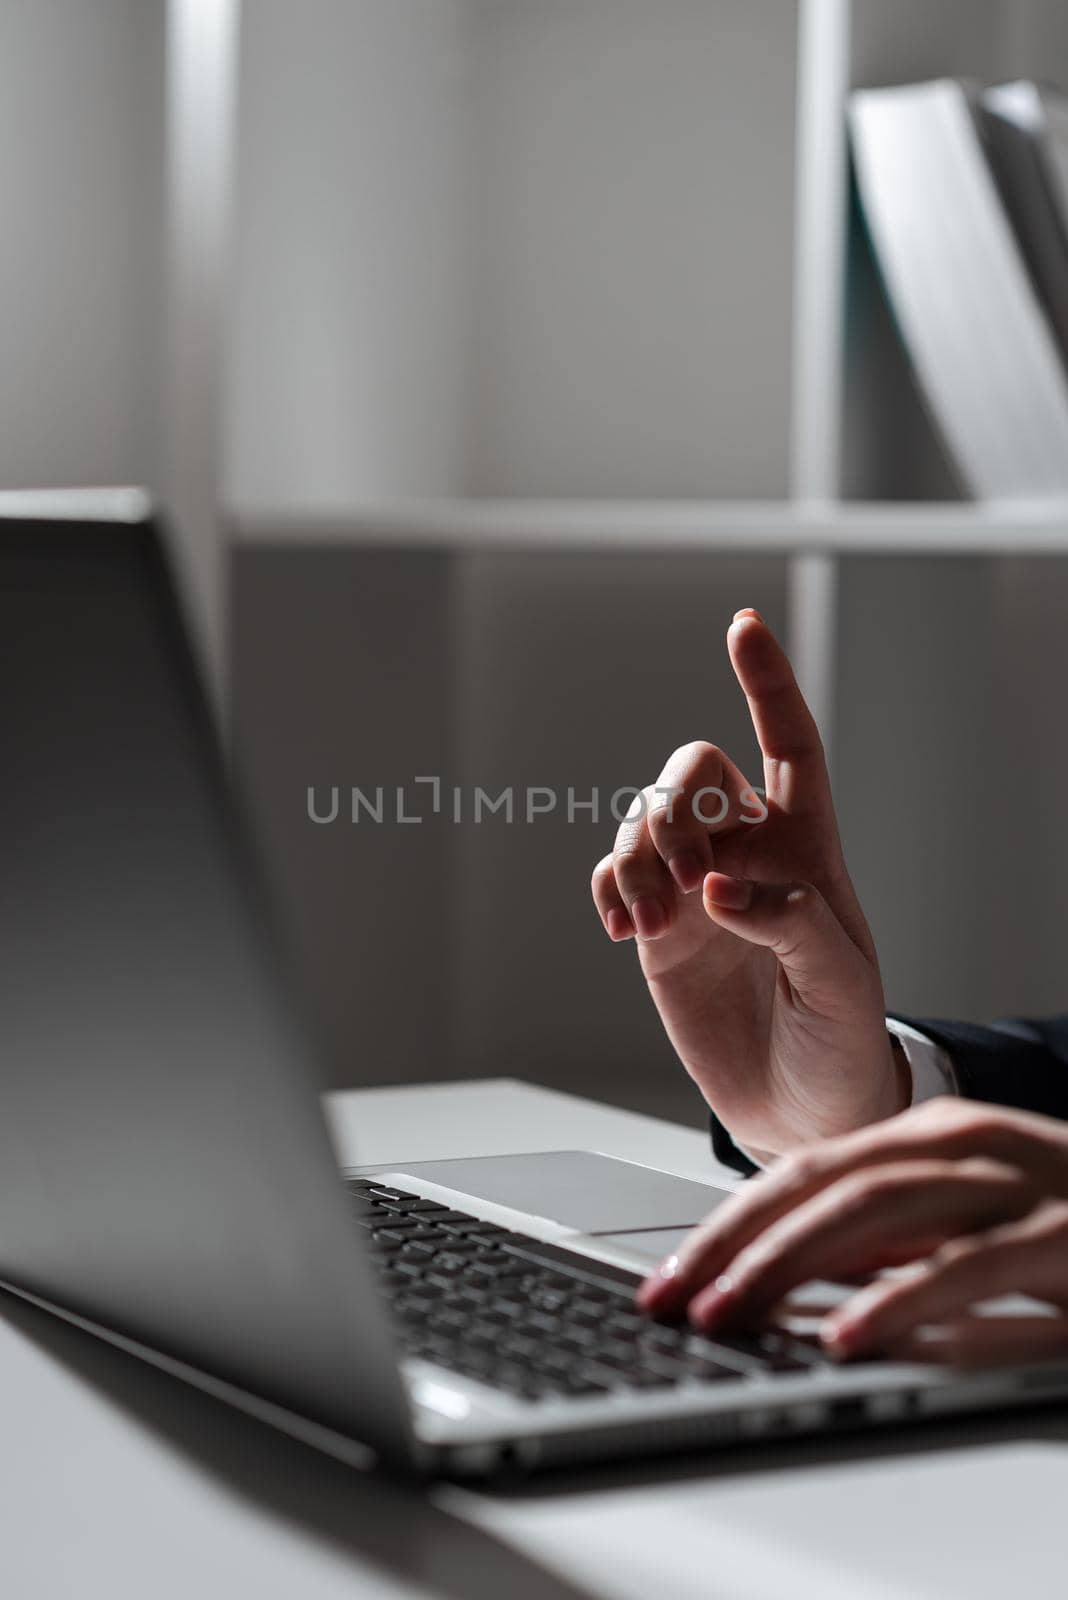 Woman Typing Updates On Lap Top And Pointing New Ideas With One Finger.